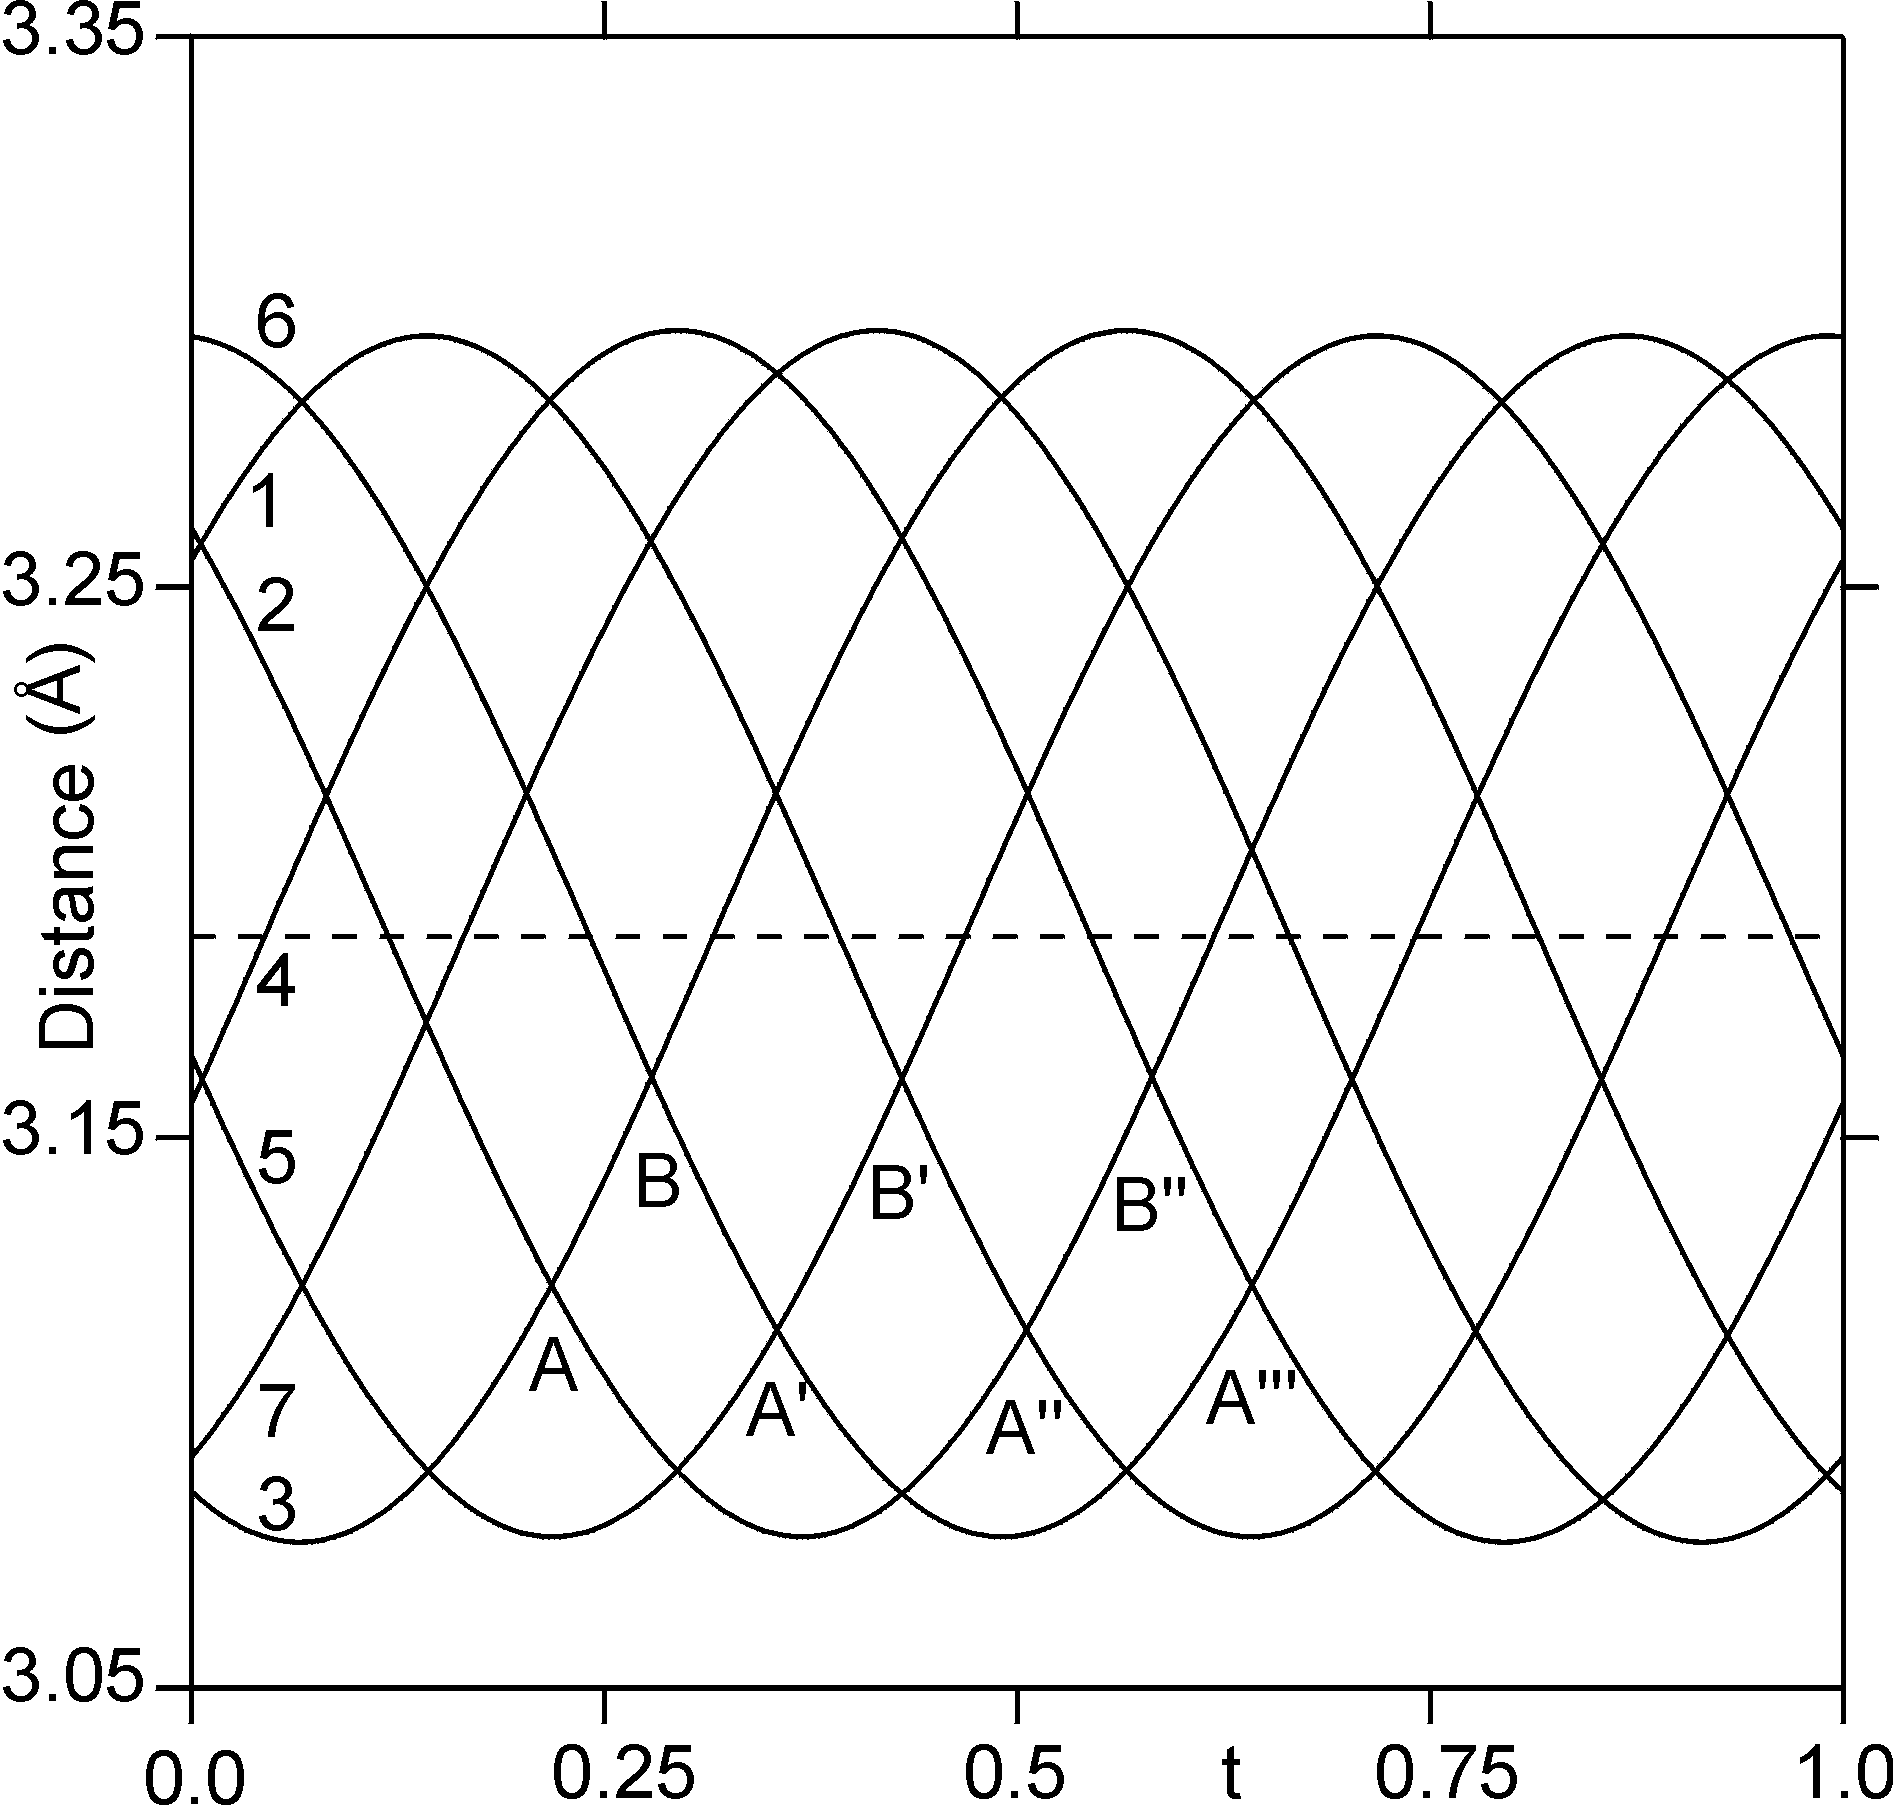 A figure of interatomic distances between consequetive Ta atoms along a chain as a function of the fourth coordinate t